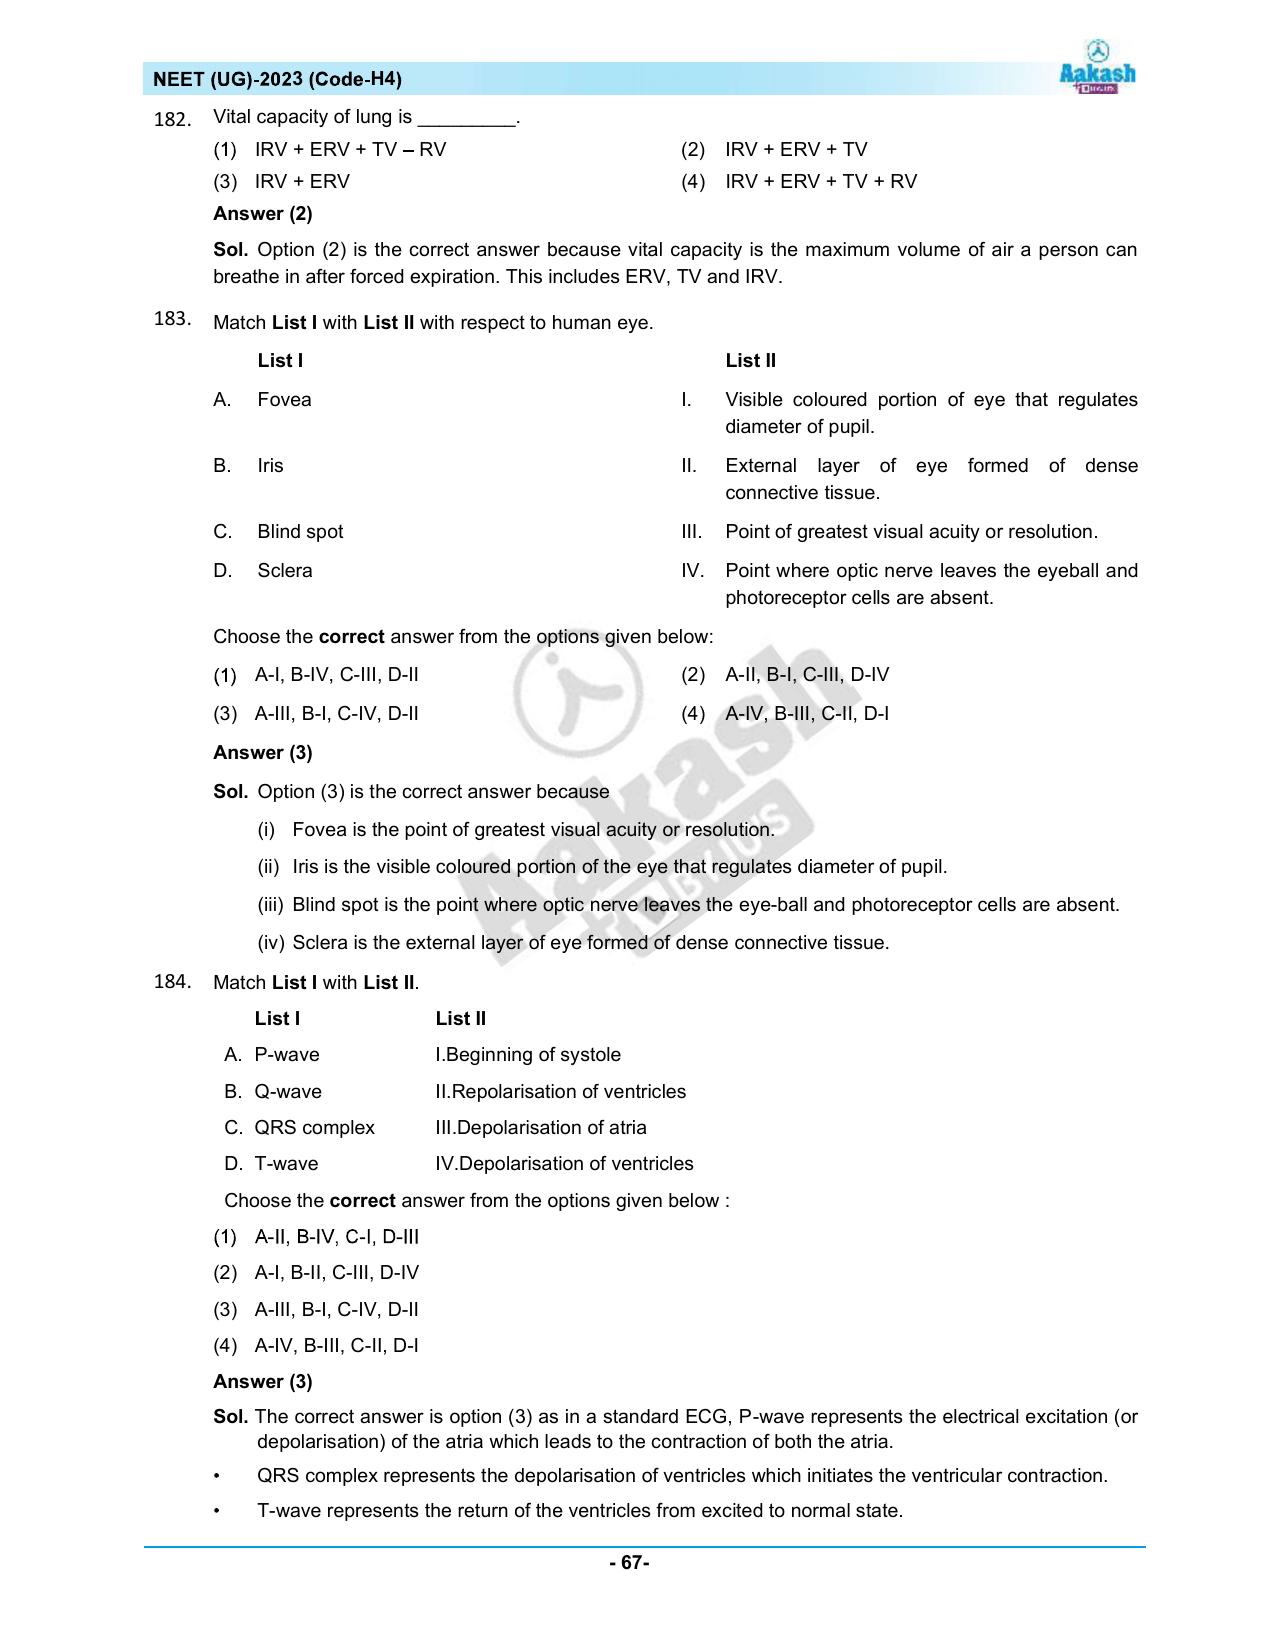 NEET 2023 Question Paper H4 - Page 67